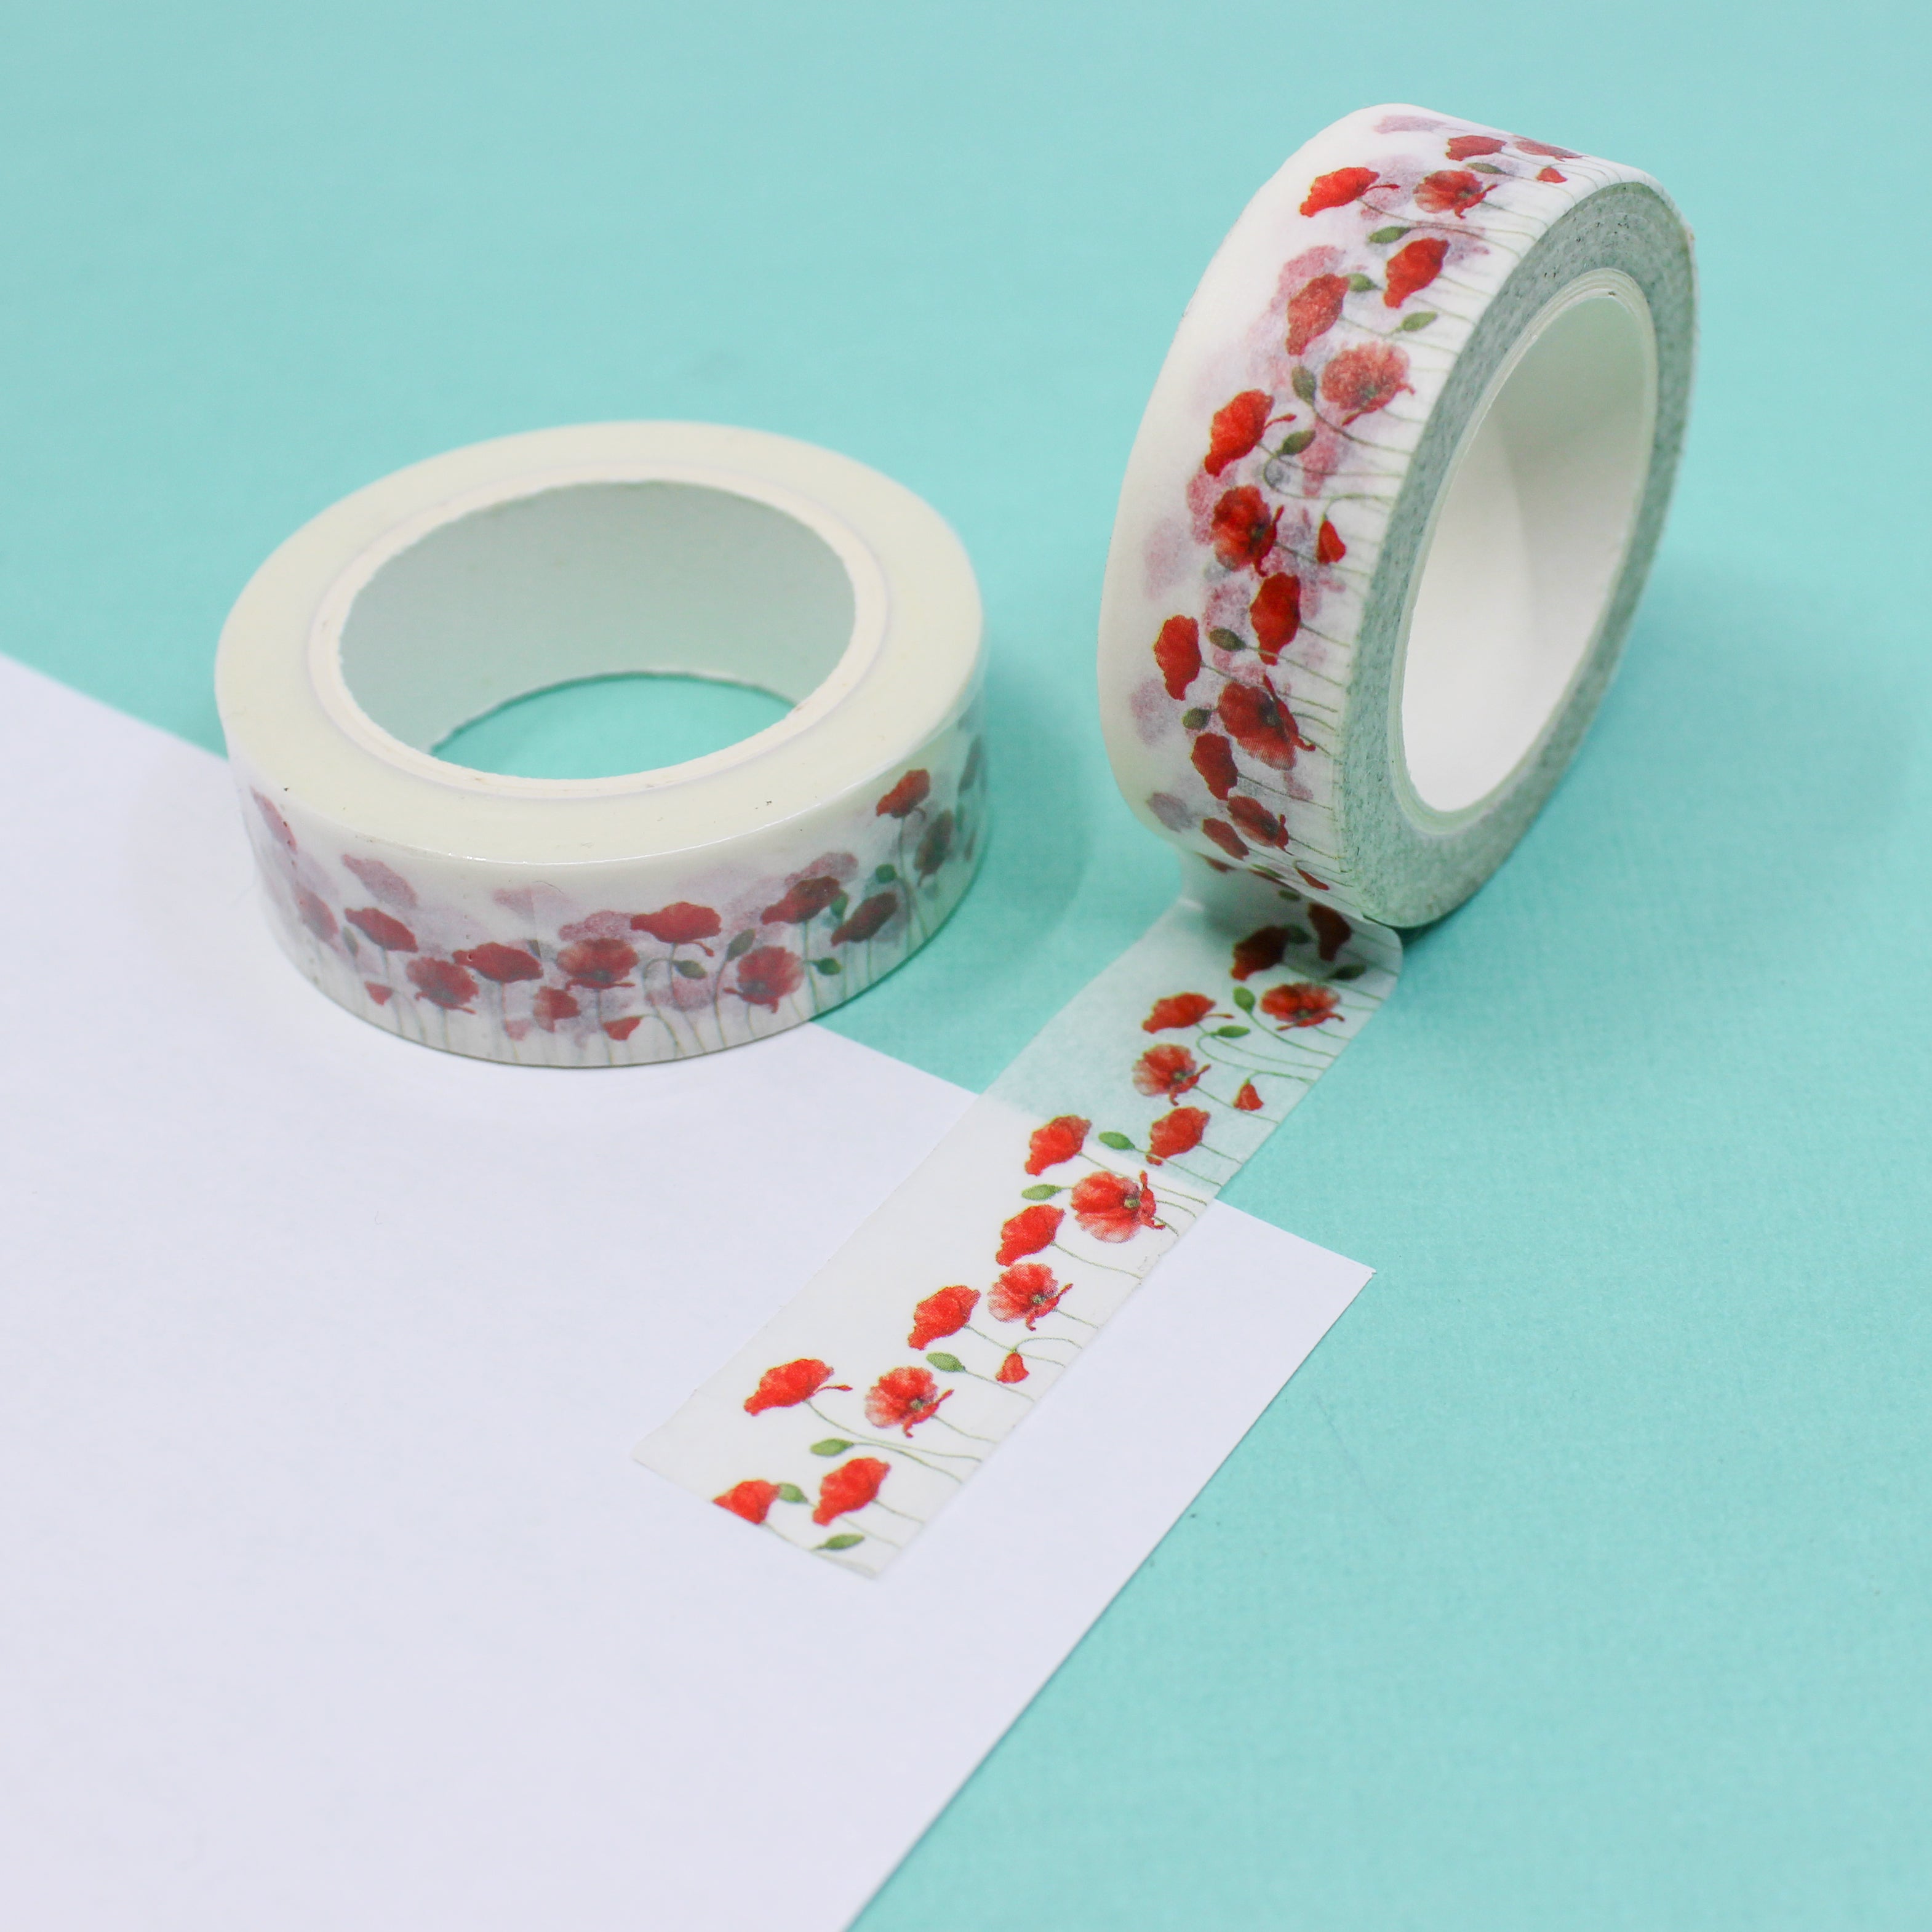 This is a poppy roses flower petals pattern washi tape from BBB Supplies Craft Shop